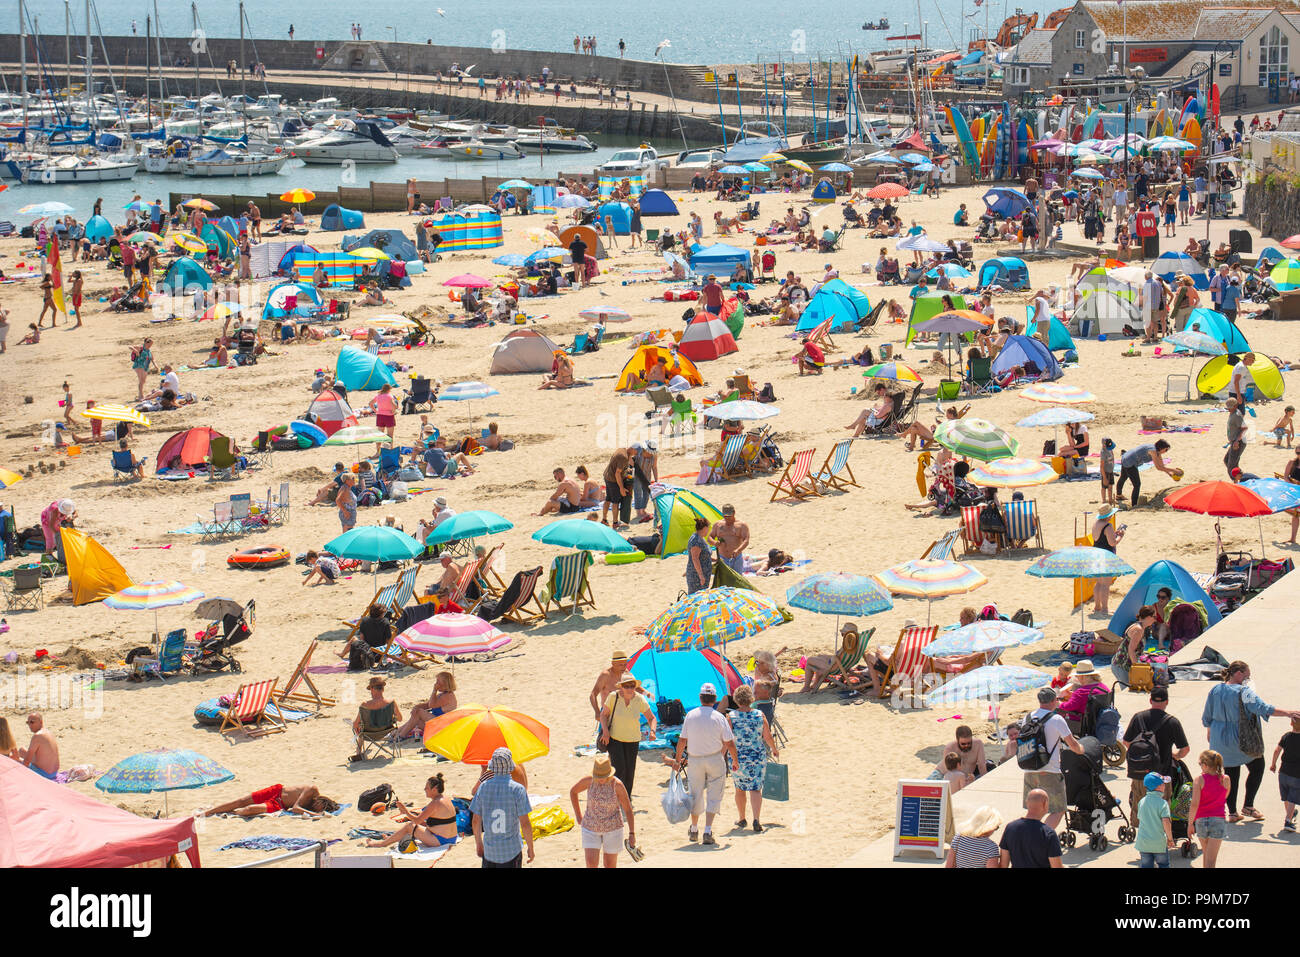 Lyme Regis, Dorset, UK. 19th July 2018.  UK Weather: Very warm and sunny in Lyme Regis.  Sunseekers flock to the beach to enjoy another day of hot sunshine and clear blue sky in the seaside resort of Lyme Regis. Credit: Celia McMahon/Alamy Live News Stock Photo